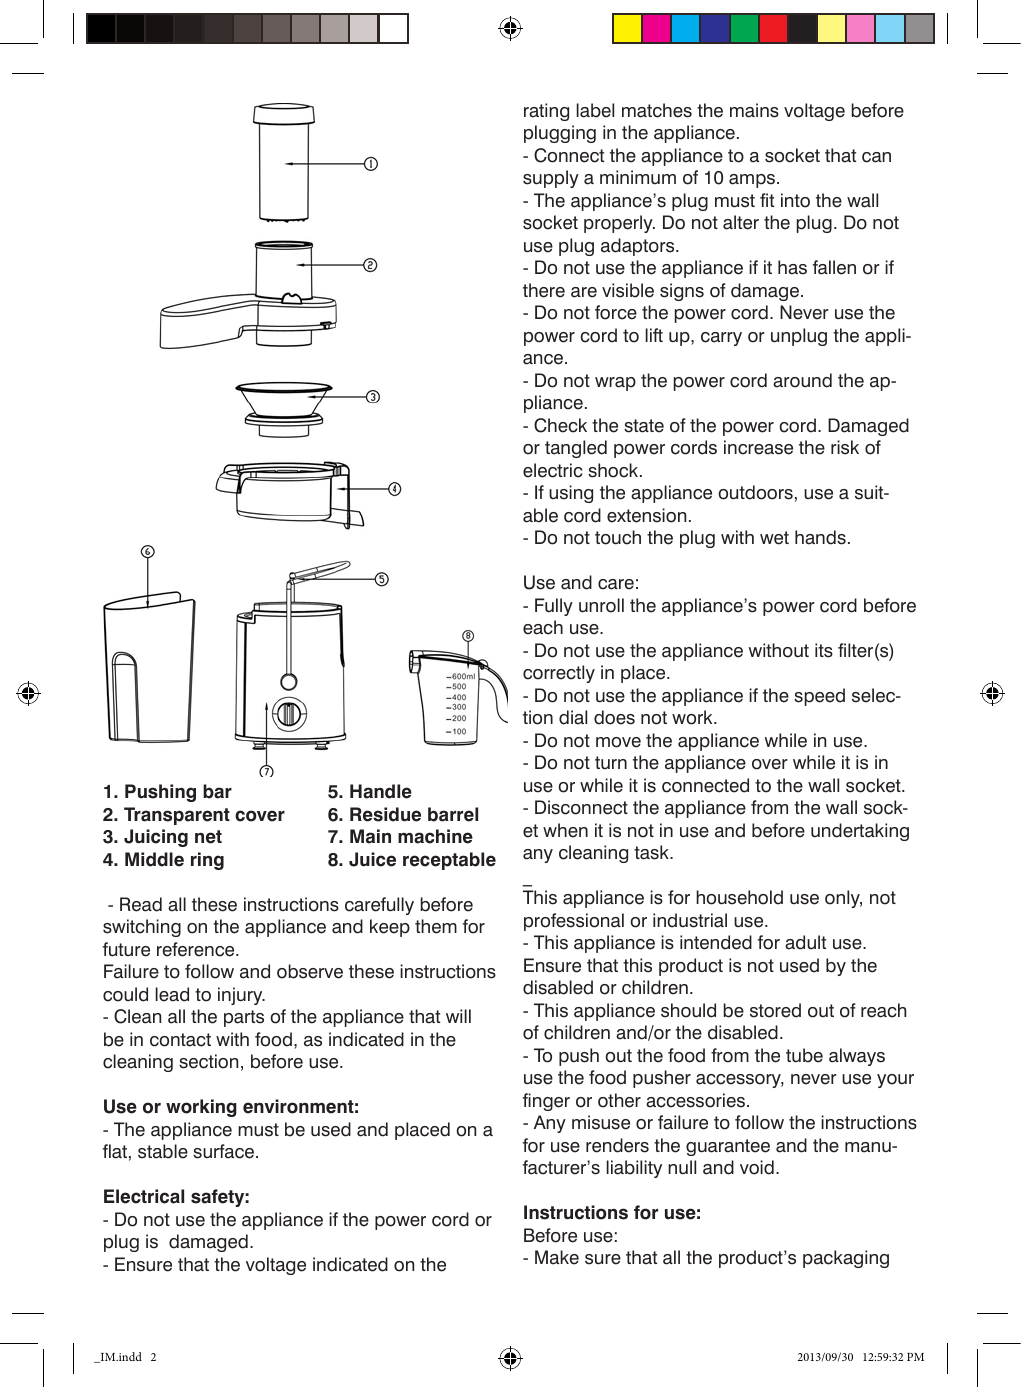 Page 2 of 4 - Mellerware 26300B User Manual  To The Ab97ed48-28c1-44ee-9154-5ac05226b821